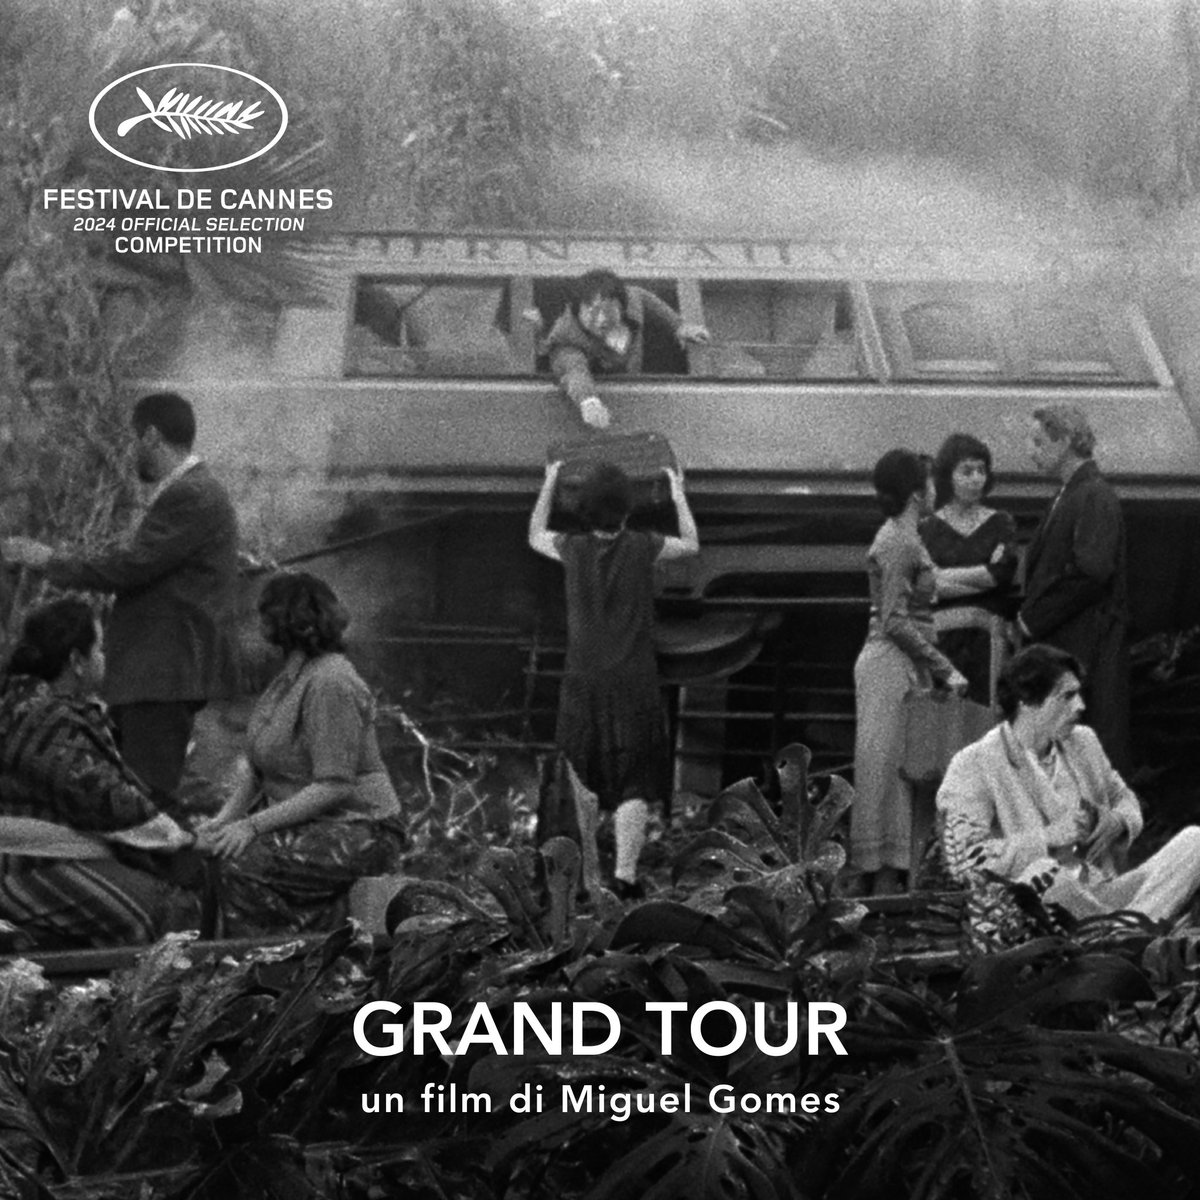 Miguel Gomes took home the coveted Best Director award for his captivating film 'Grand Tour'. #feedmile #Cannes #MiguelGomes #Director #Award #GrandTour